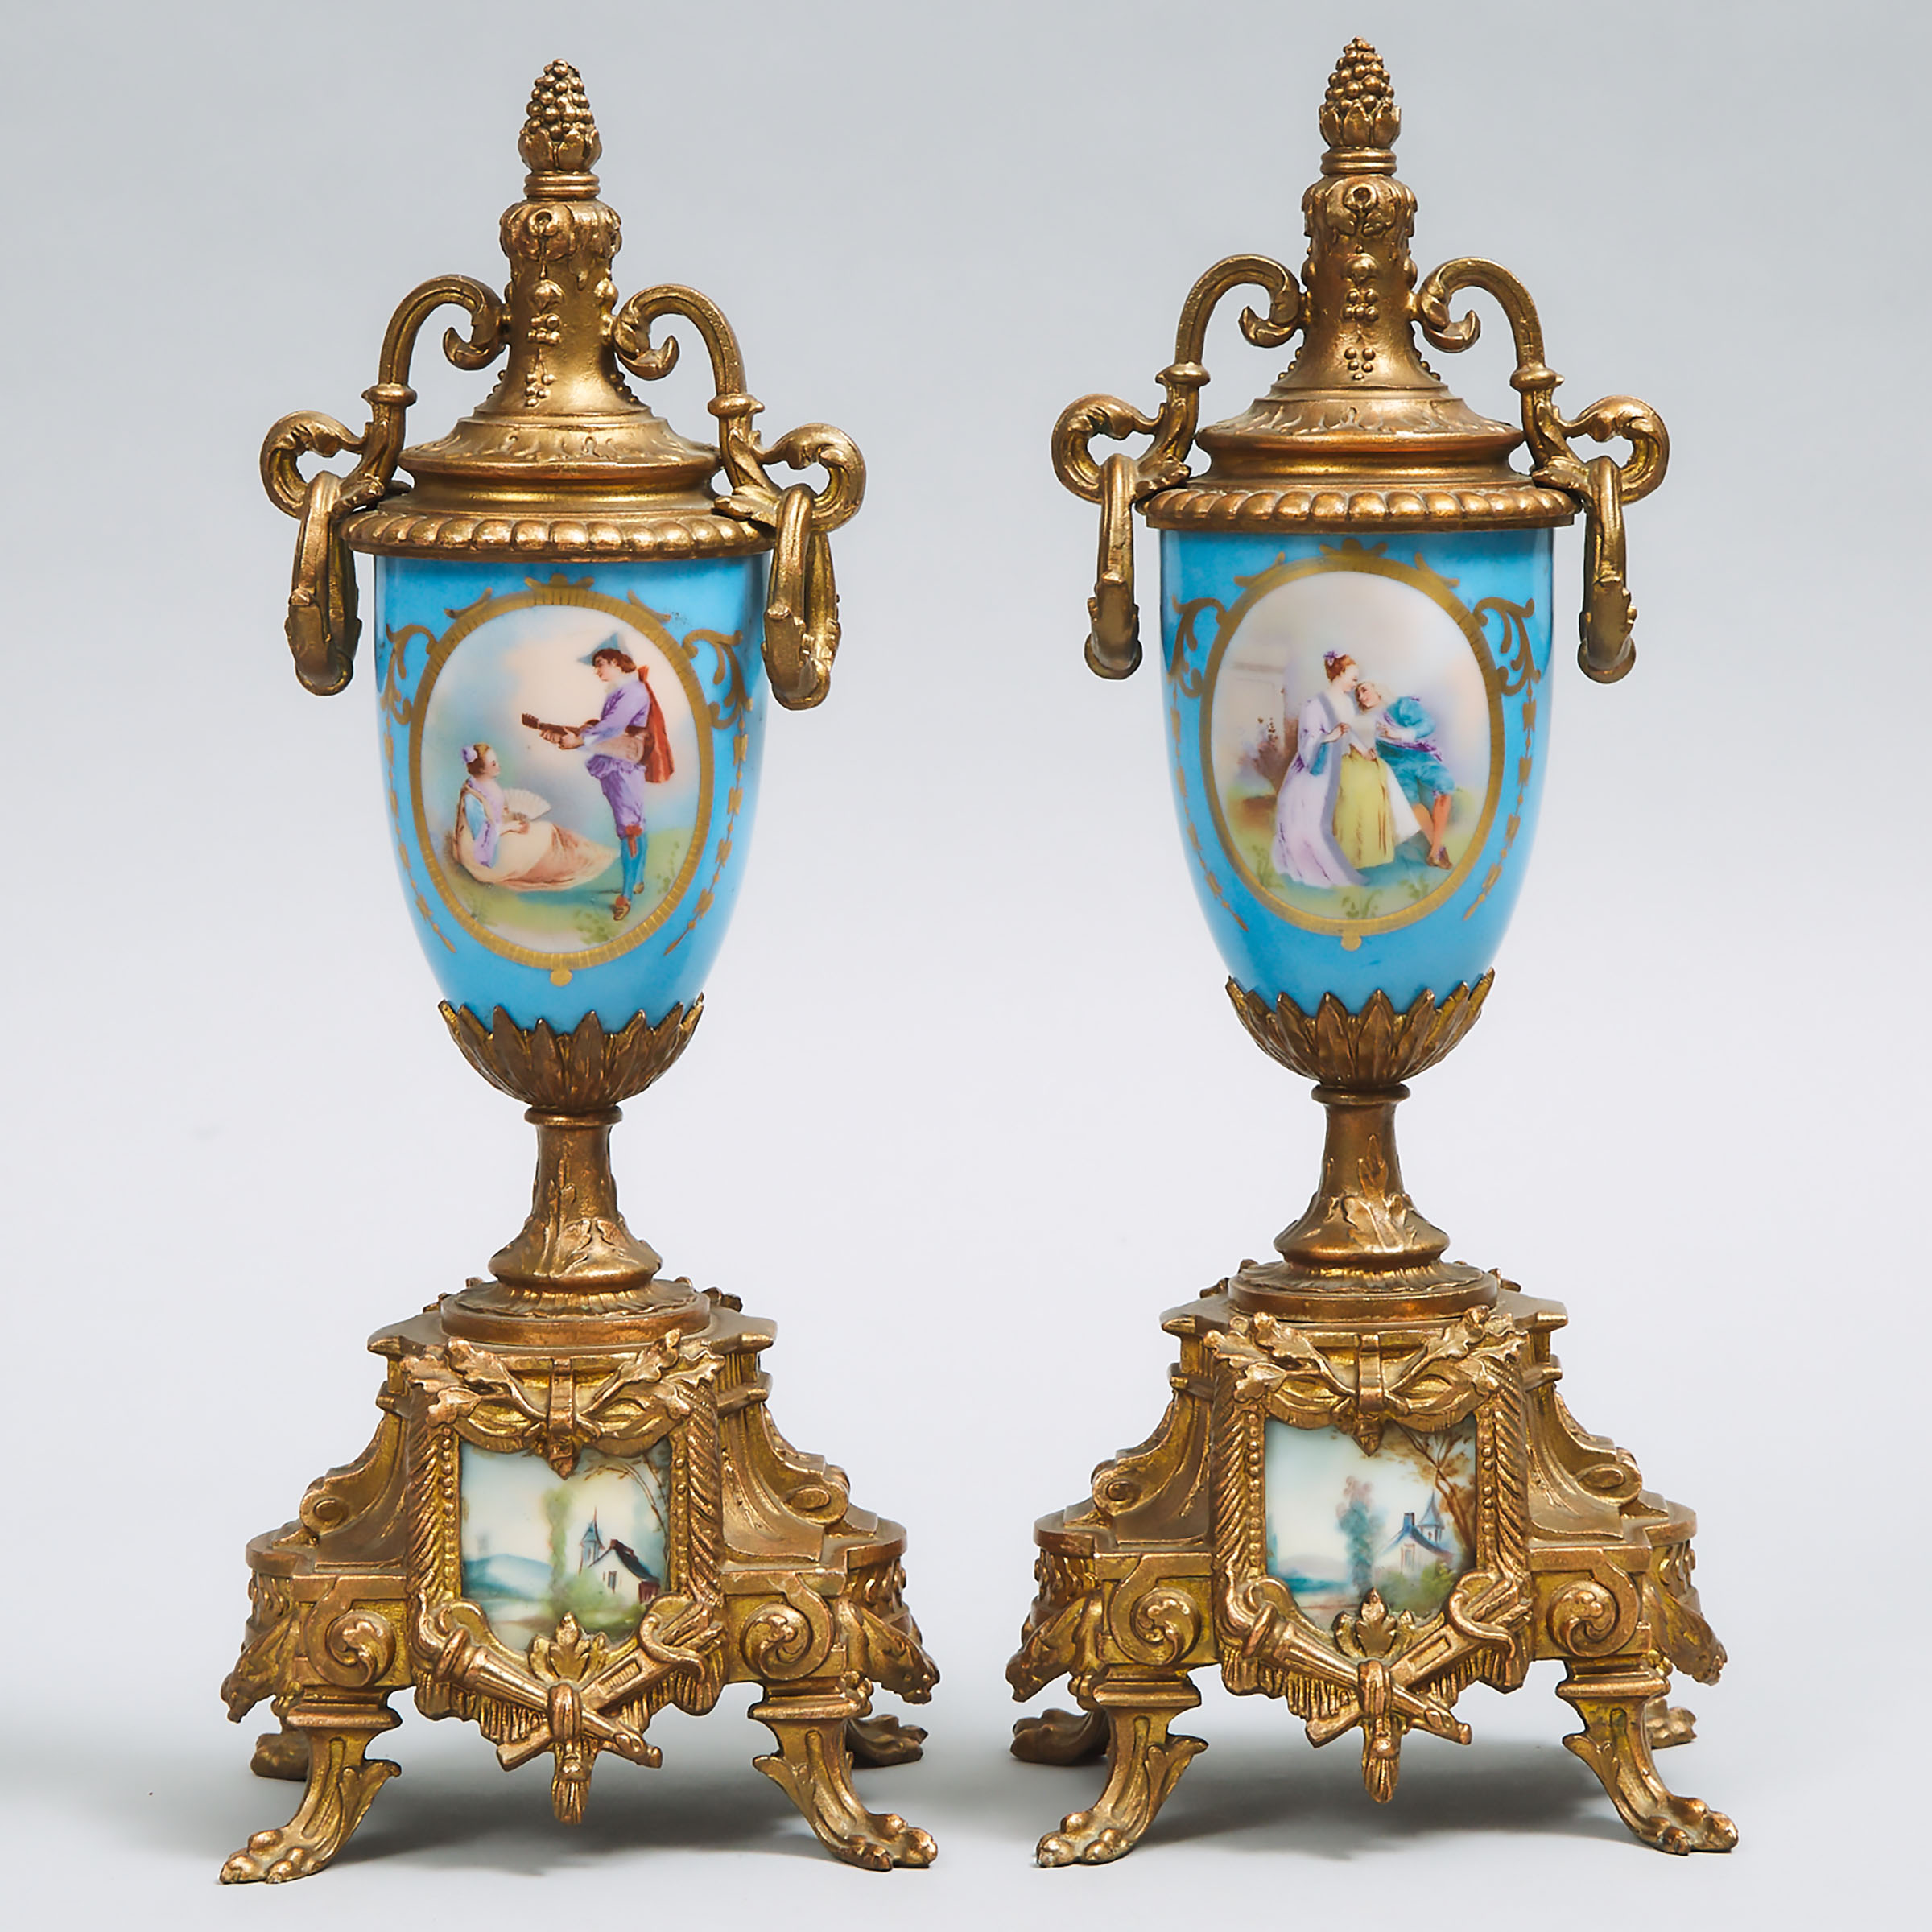 Pair of Gilt-Metal Mounted 'Sèvres' Covered Vases, late 19th century